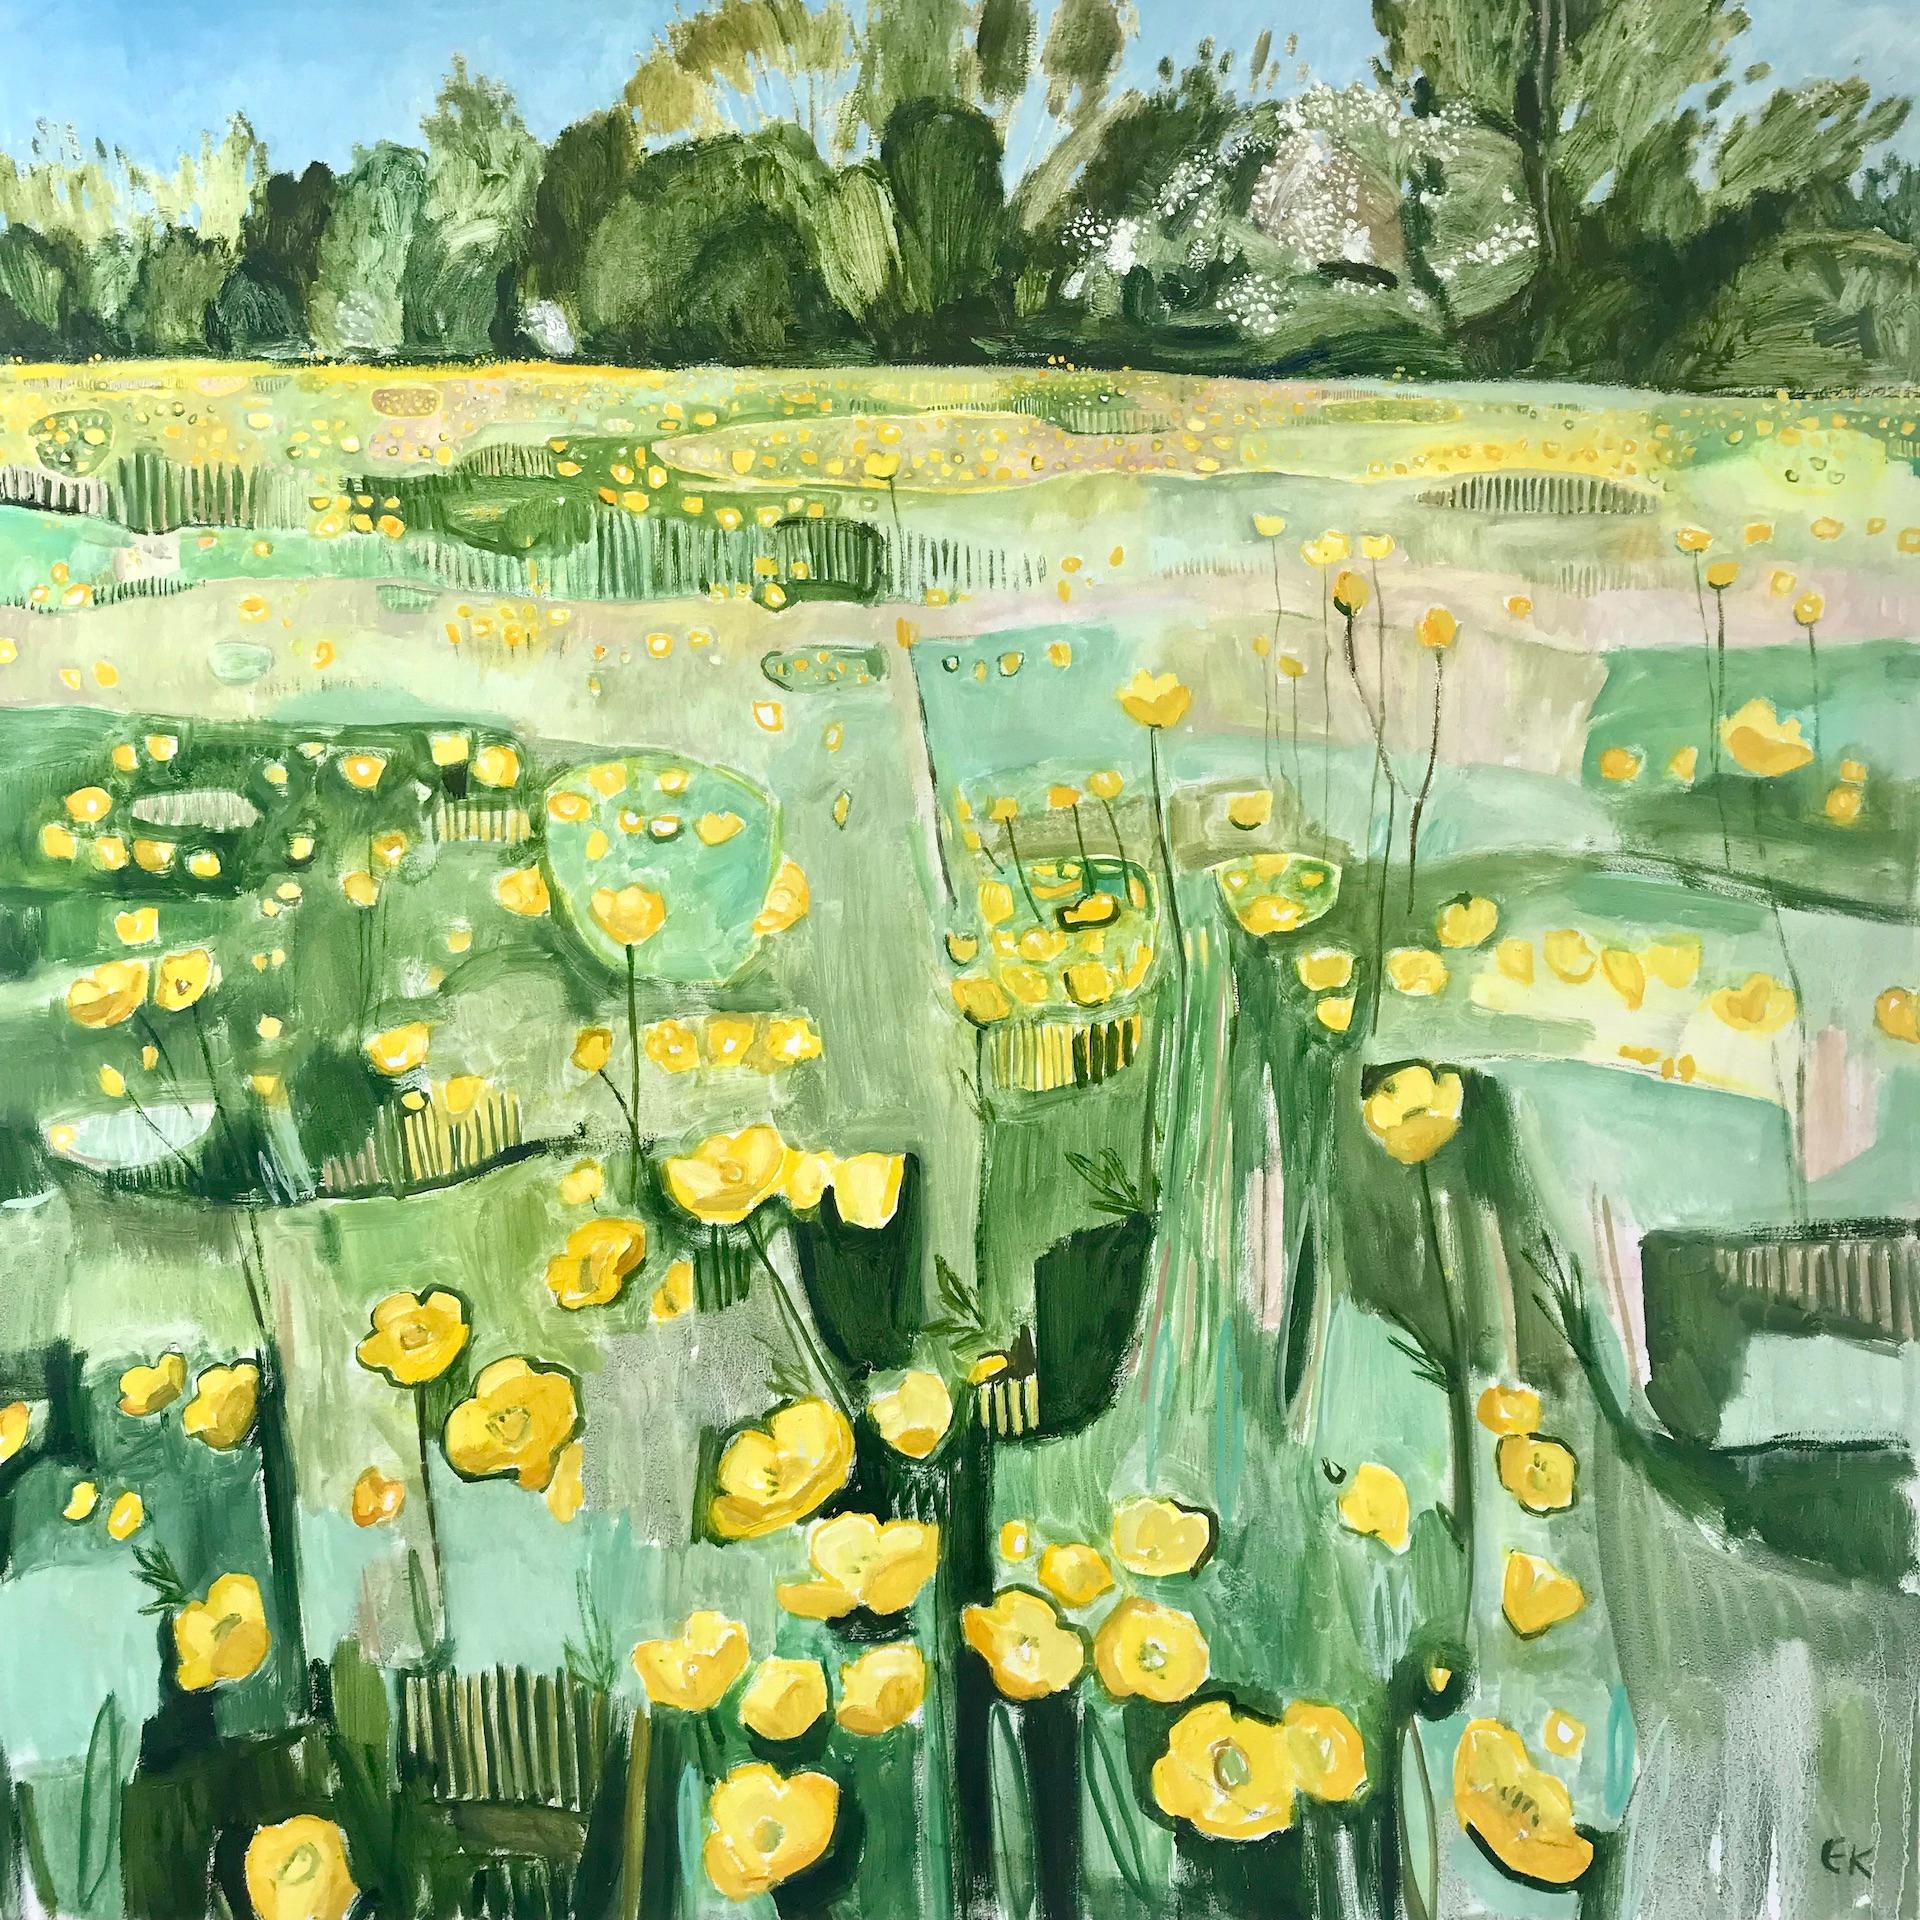 Just Buttercups by Elaine , Original art, Contemporary abstract art, Painting